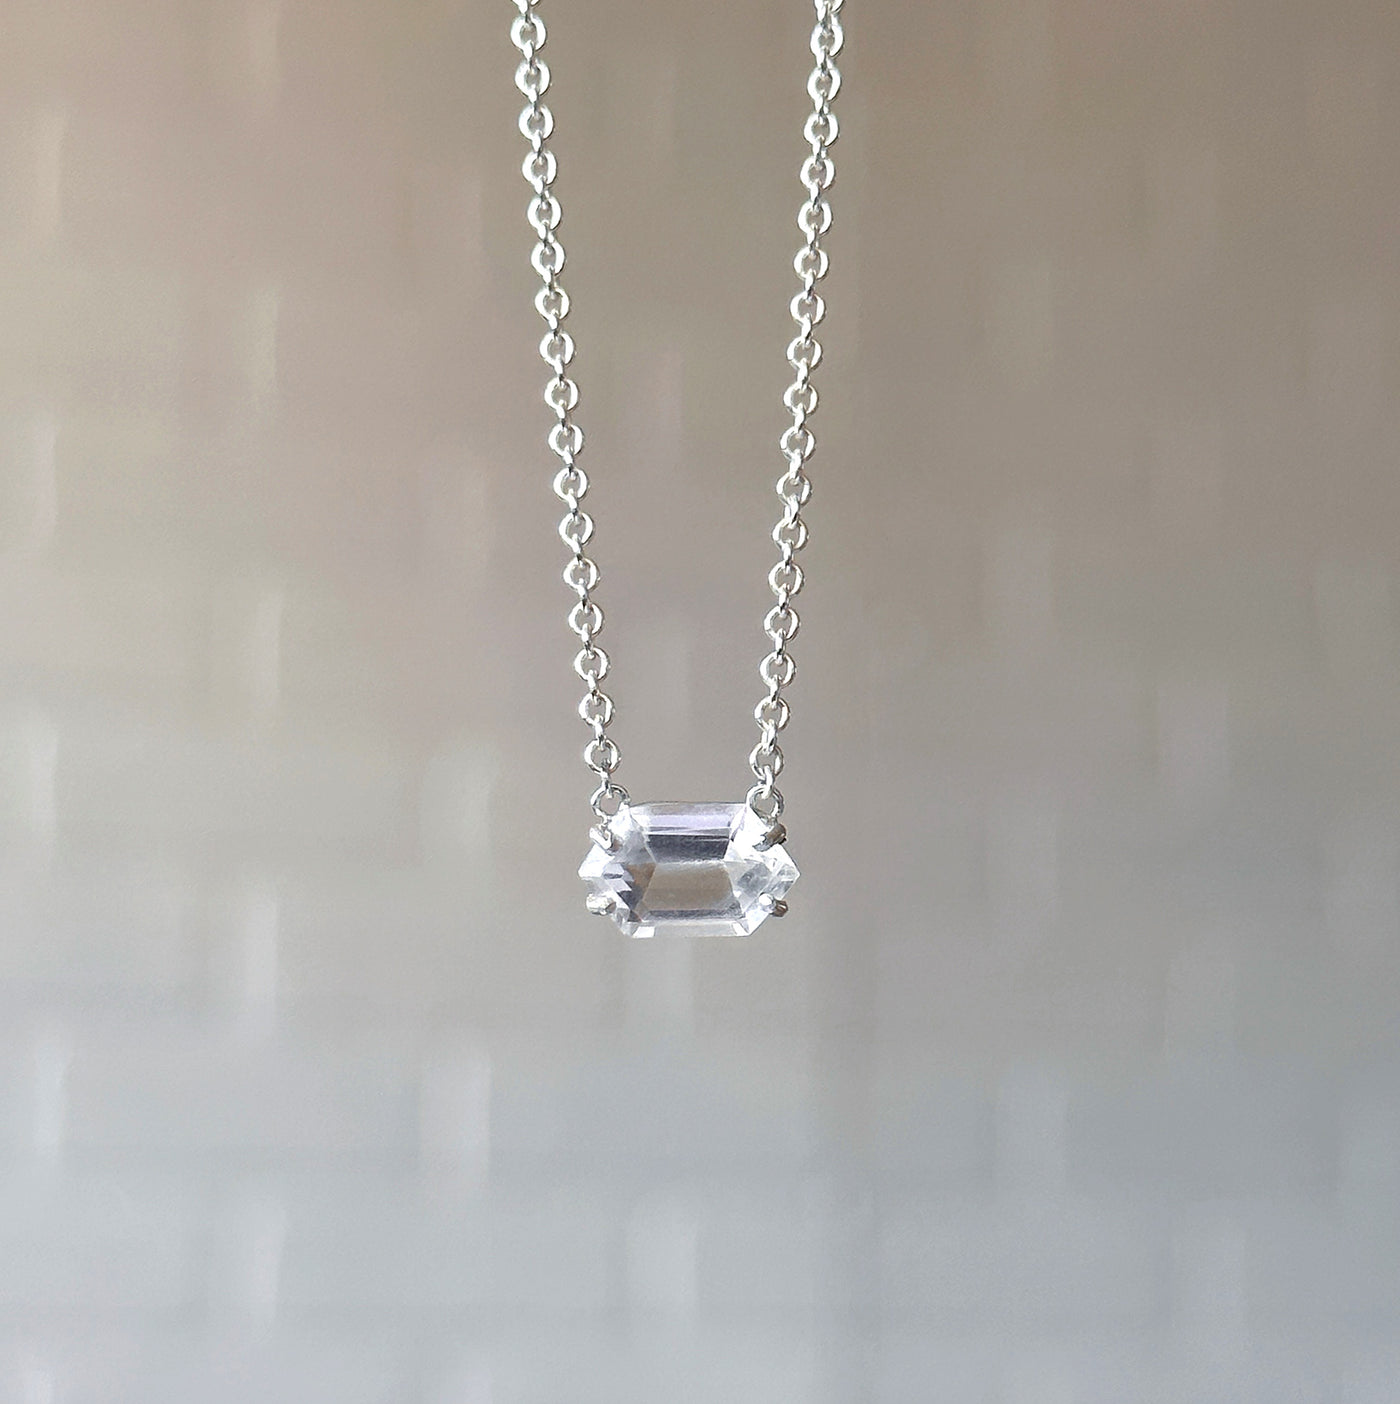 Emerson Quartz Necklace in Silver hanging in front of a white brick wall, front angle